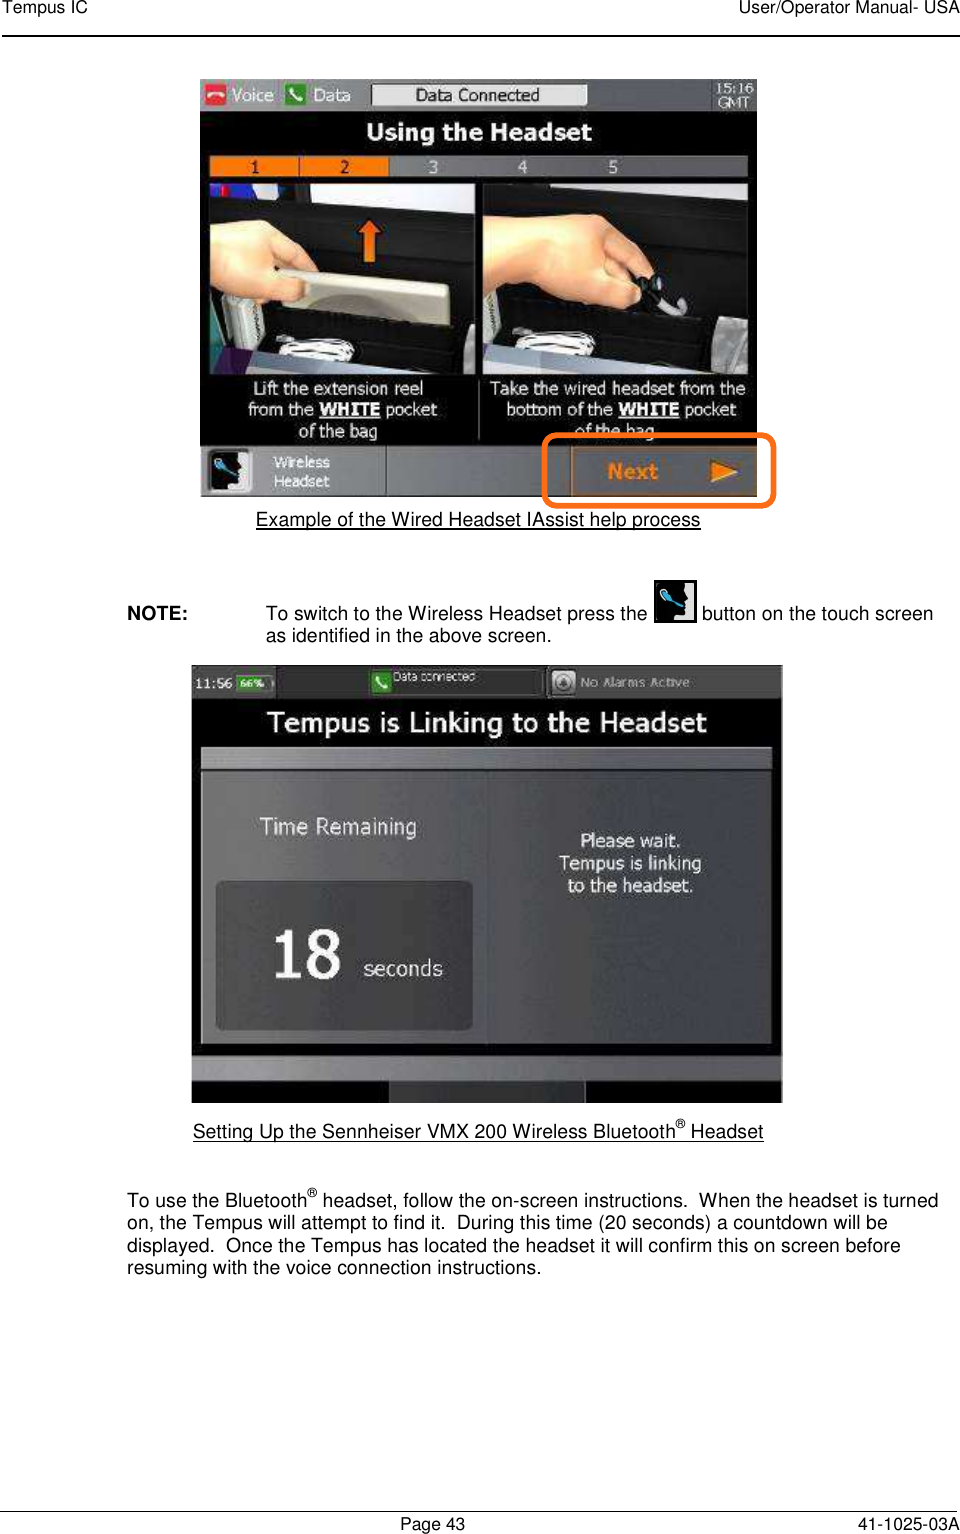 Tempus IC    User/Operator Manual- USA        Page 43  41-1025-03A  Example of the Wired Headset IAssist help process  NOTE:  To switch to the Wireless Headset press the   button on the touch screen as identified in the above screen.  Setting Up the Sennheiser VMX 200 Wireless Bluetooth® Headset  To use the Bluetooth® headset, follow the on-screen instructions.  When the headset is turned on, the Tempus will attempt to find it.  During this time (20 seconds) a countdown will be displayed.  Once the Tempus has located the headset it will confirm this on screen before resuming with the voice connection instructions.   